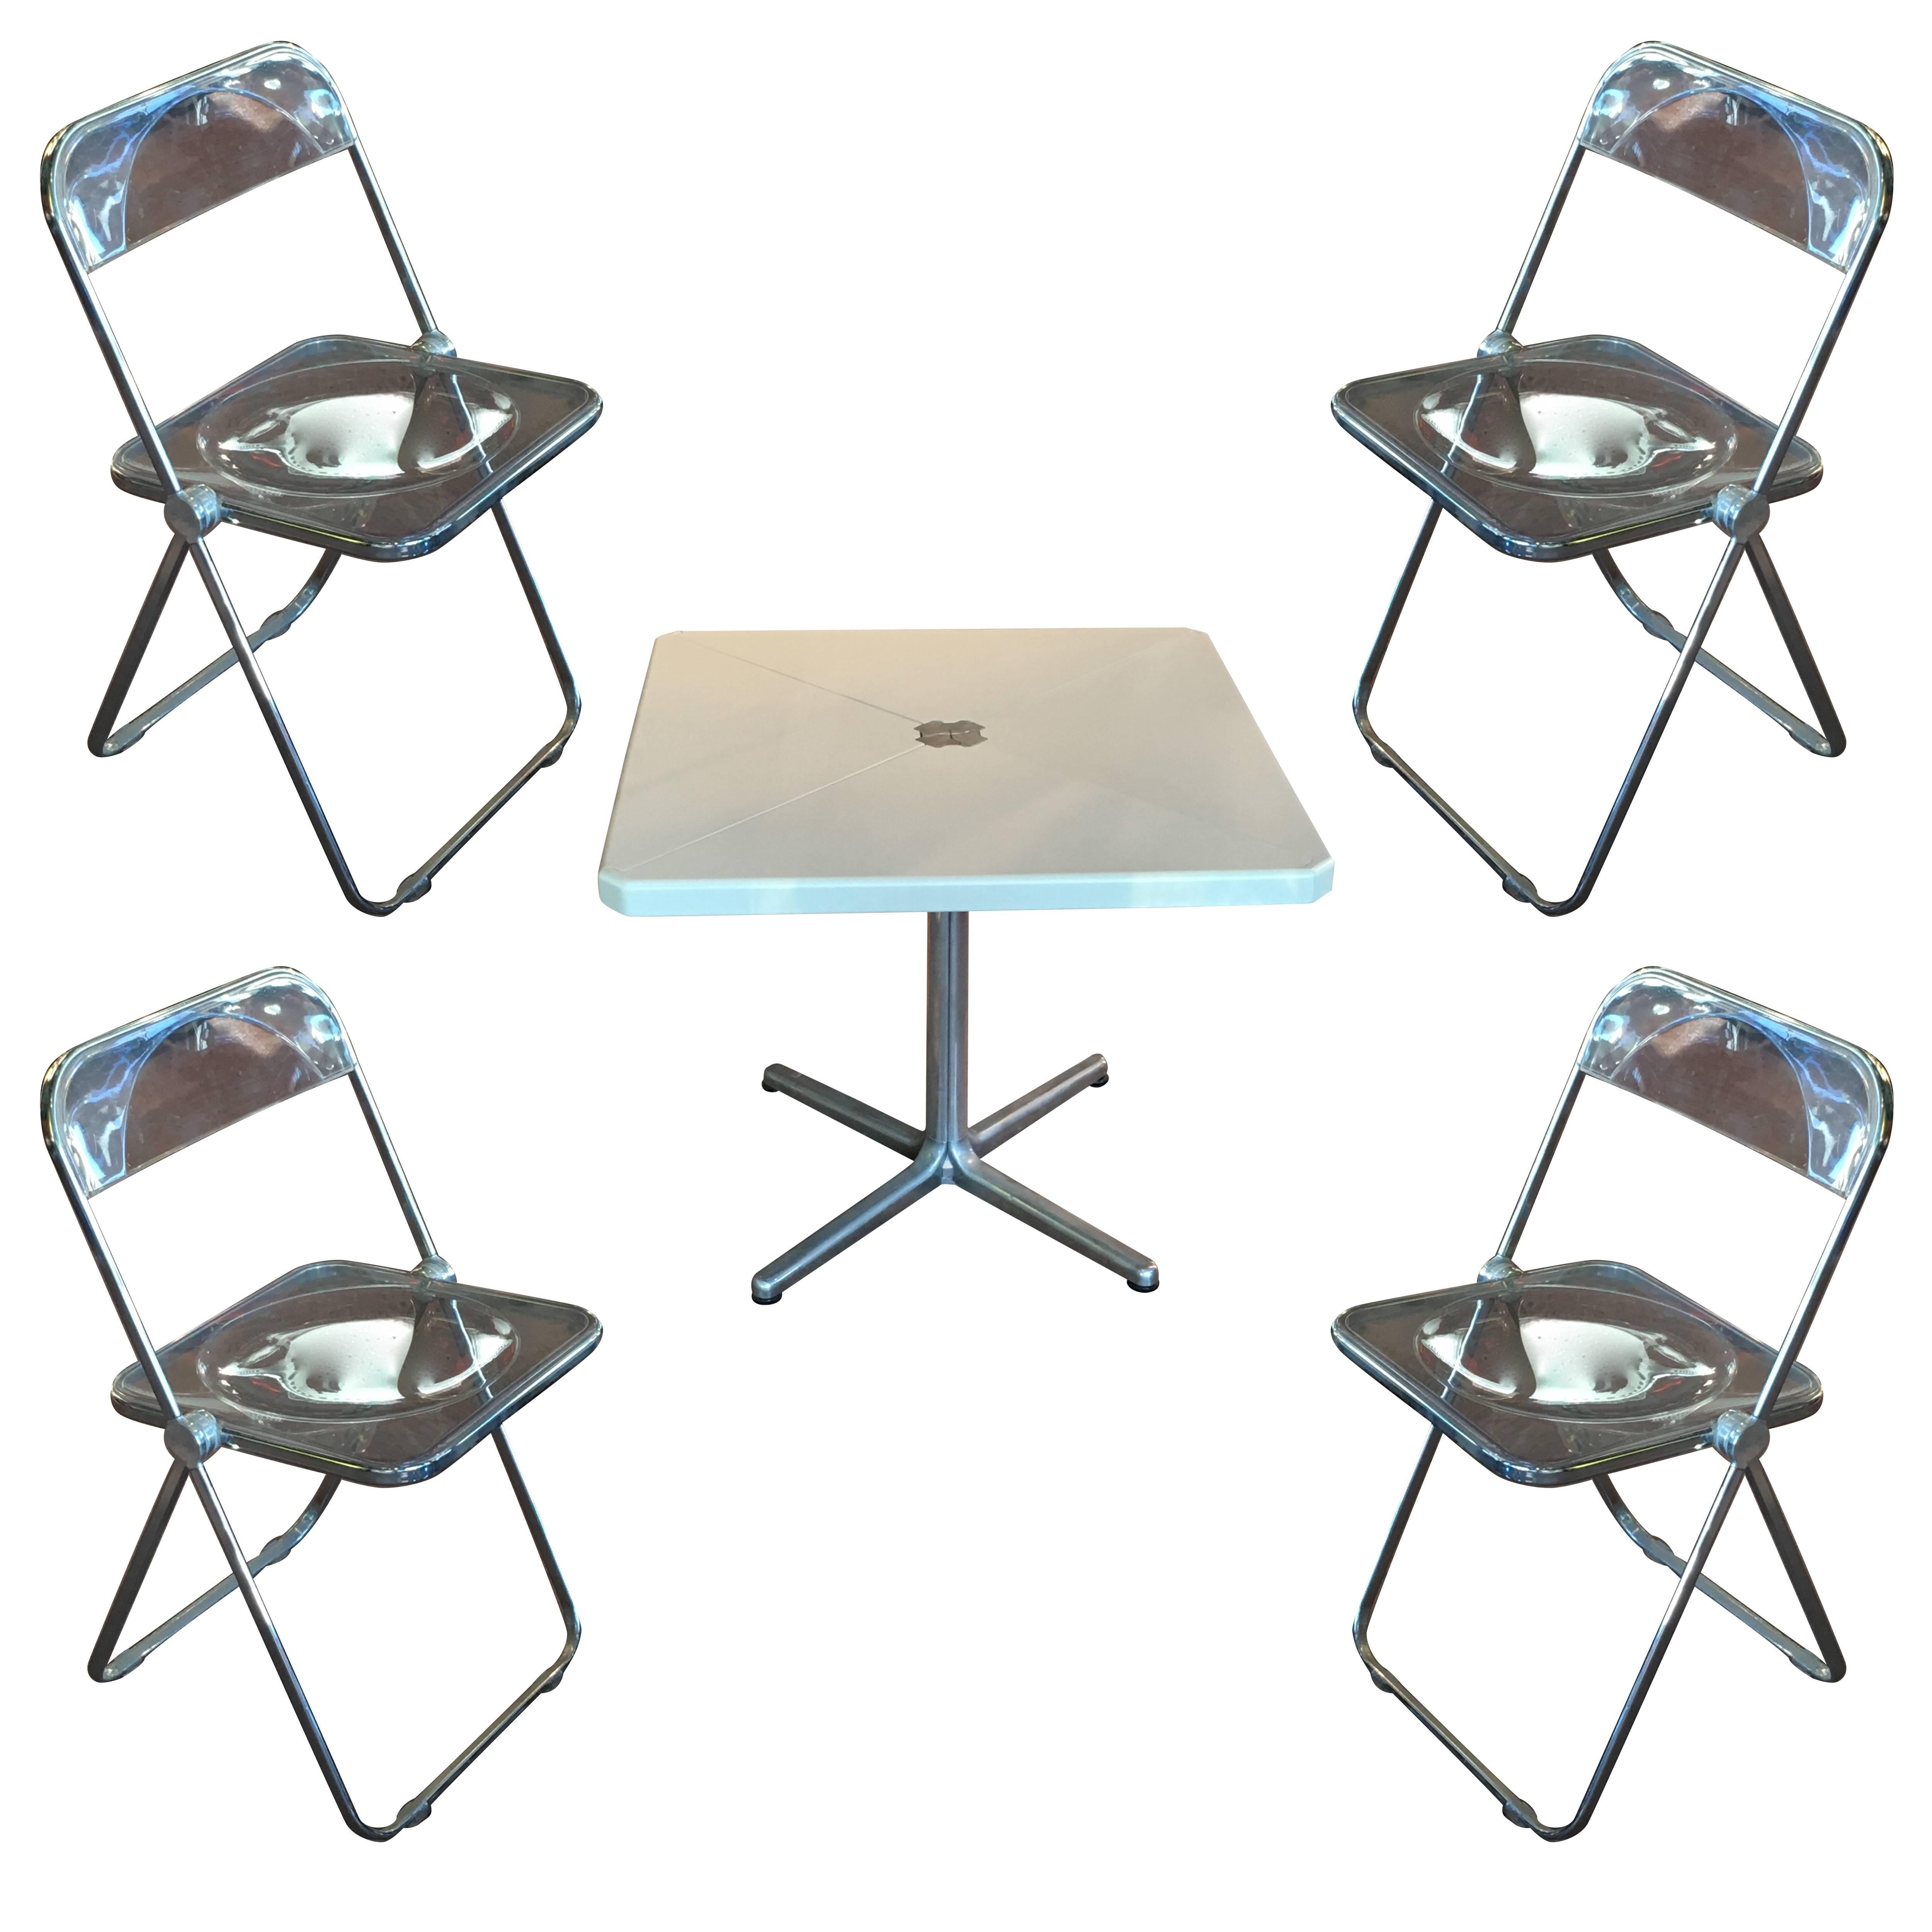 Modern Metal Folding Card Table and Four "Plia" Chairs by Piretti for Castelli